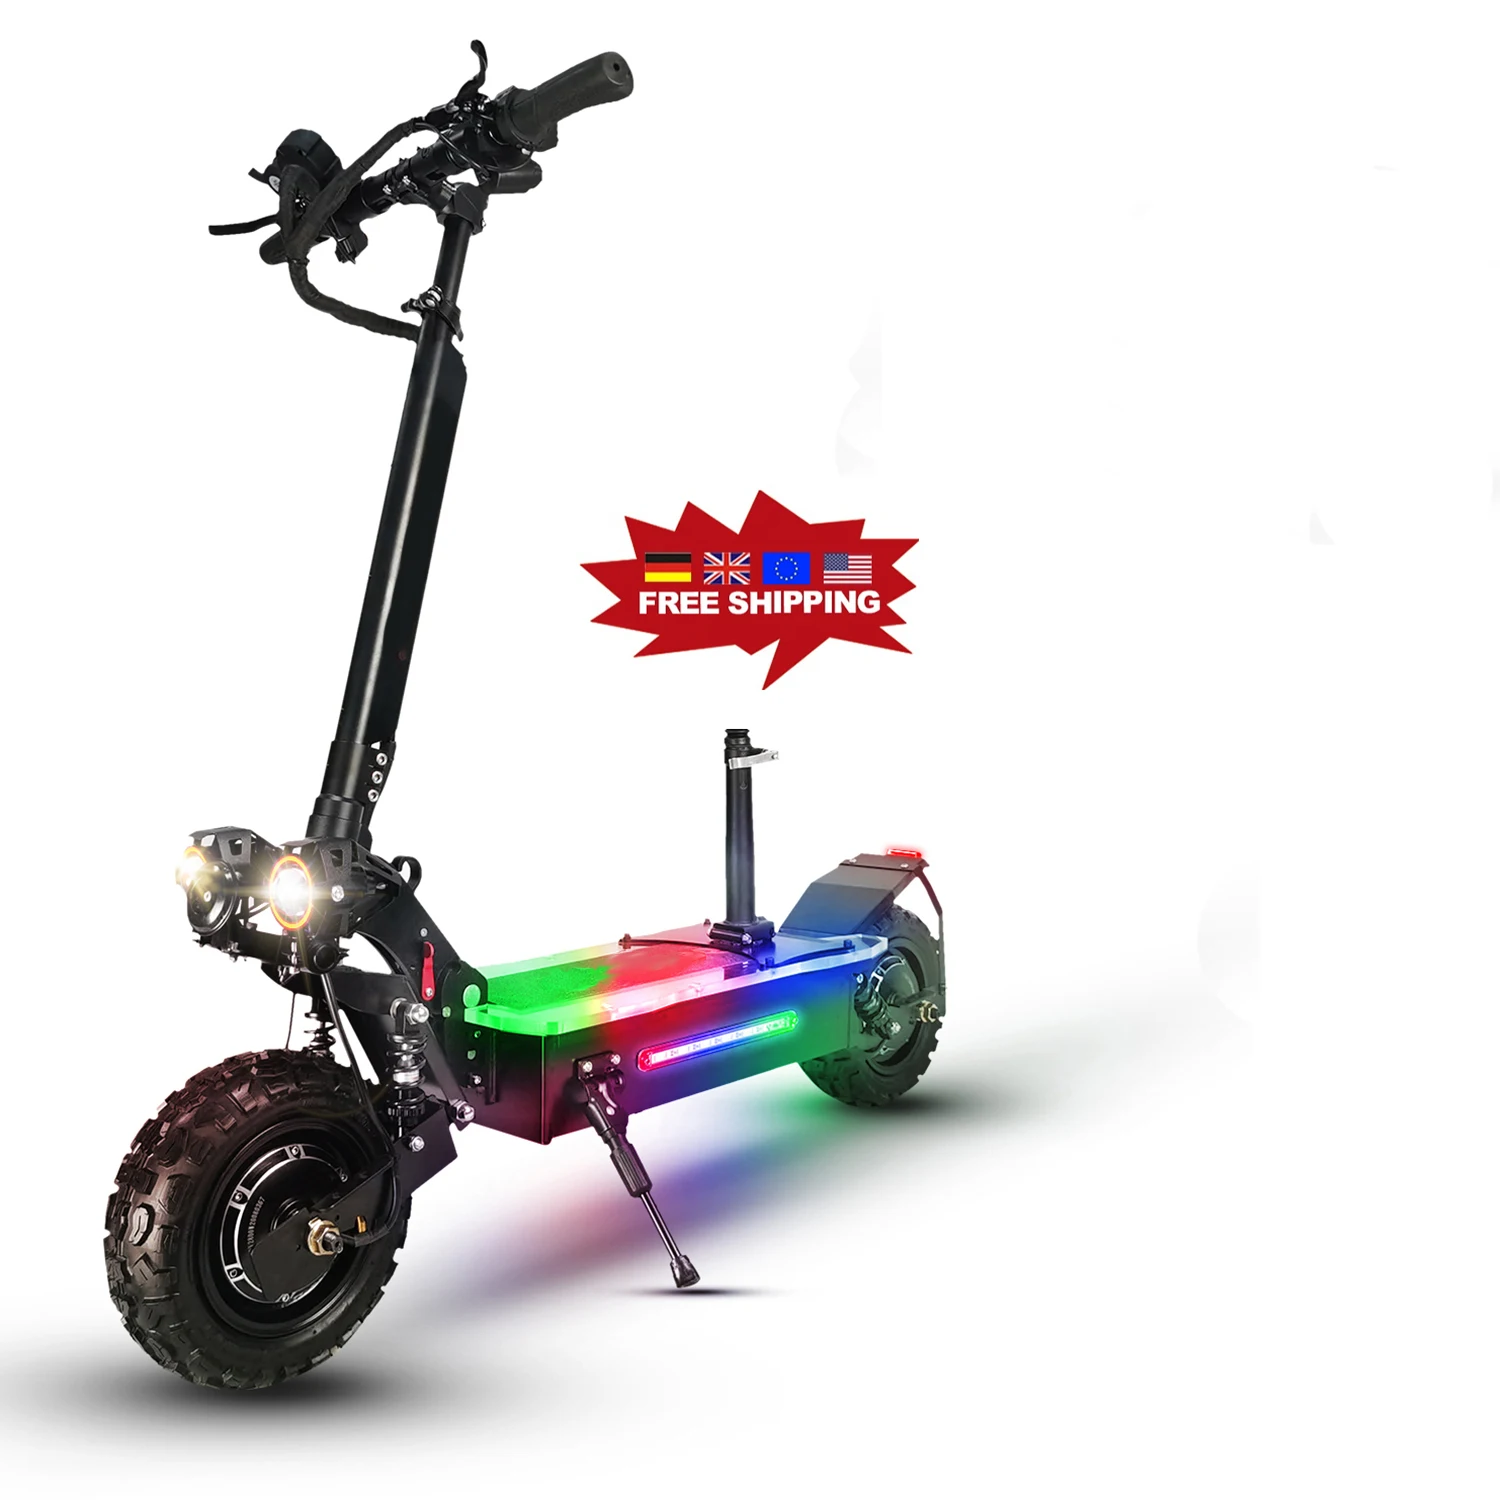 

Long range high speed 100km/h dual motor 60v 5600w foldable waterproof scooter for adult